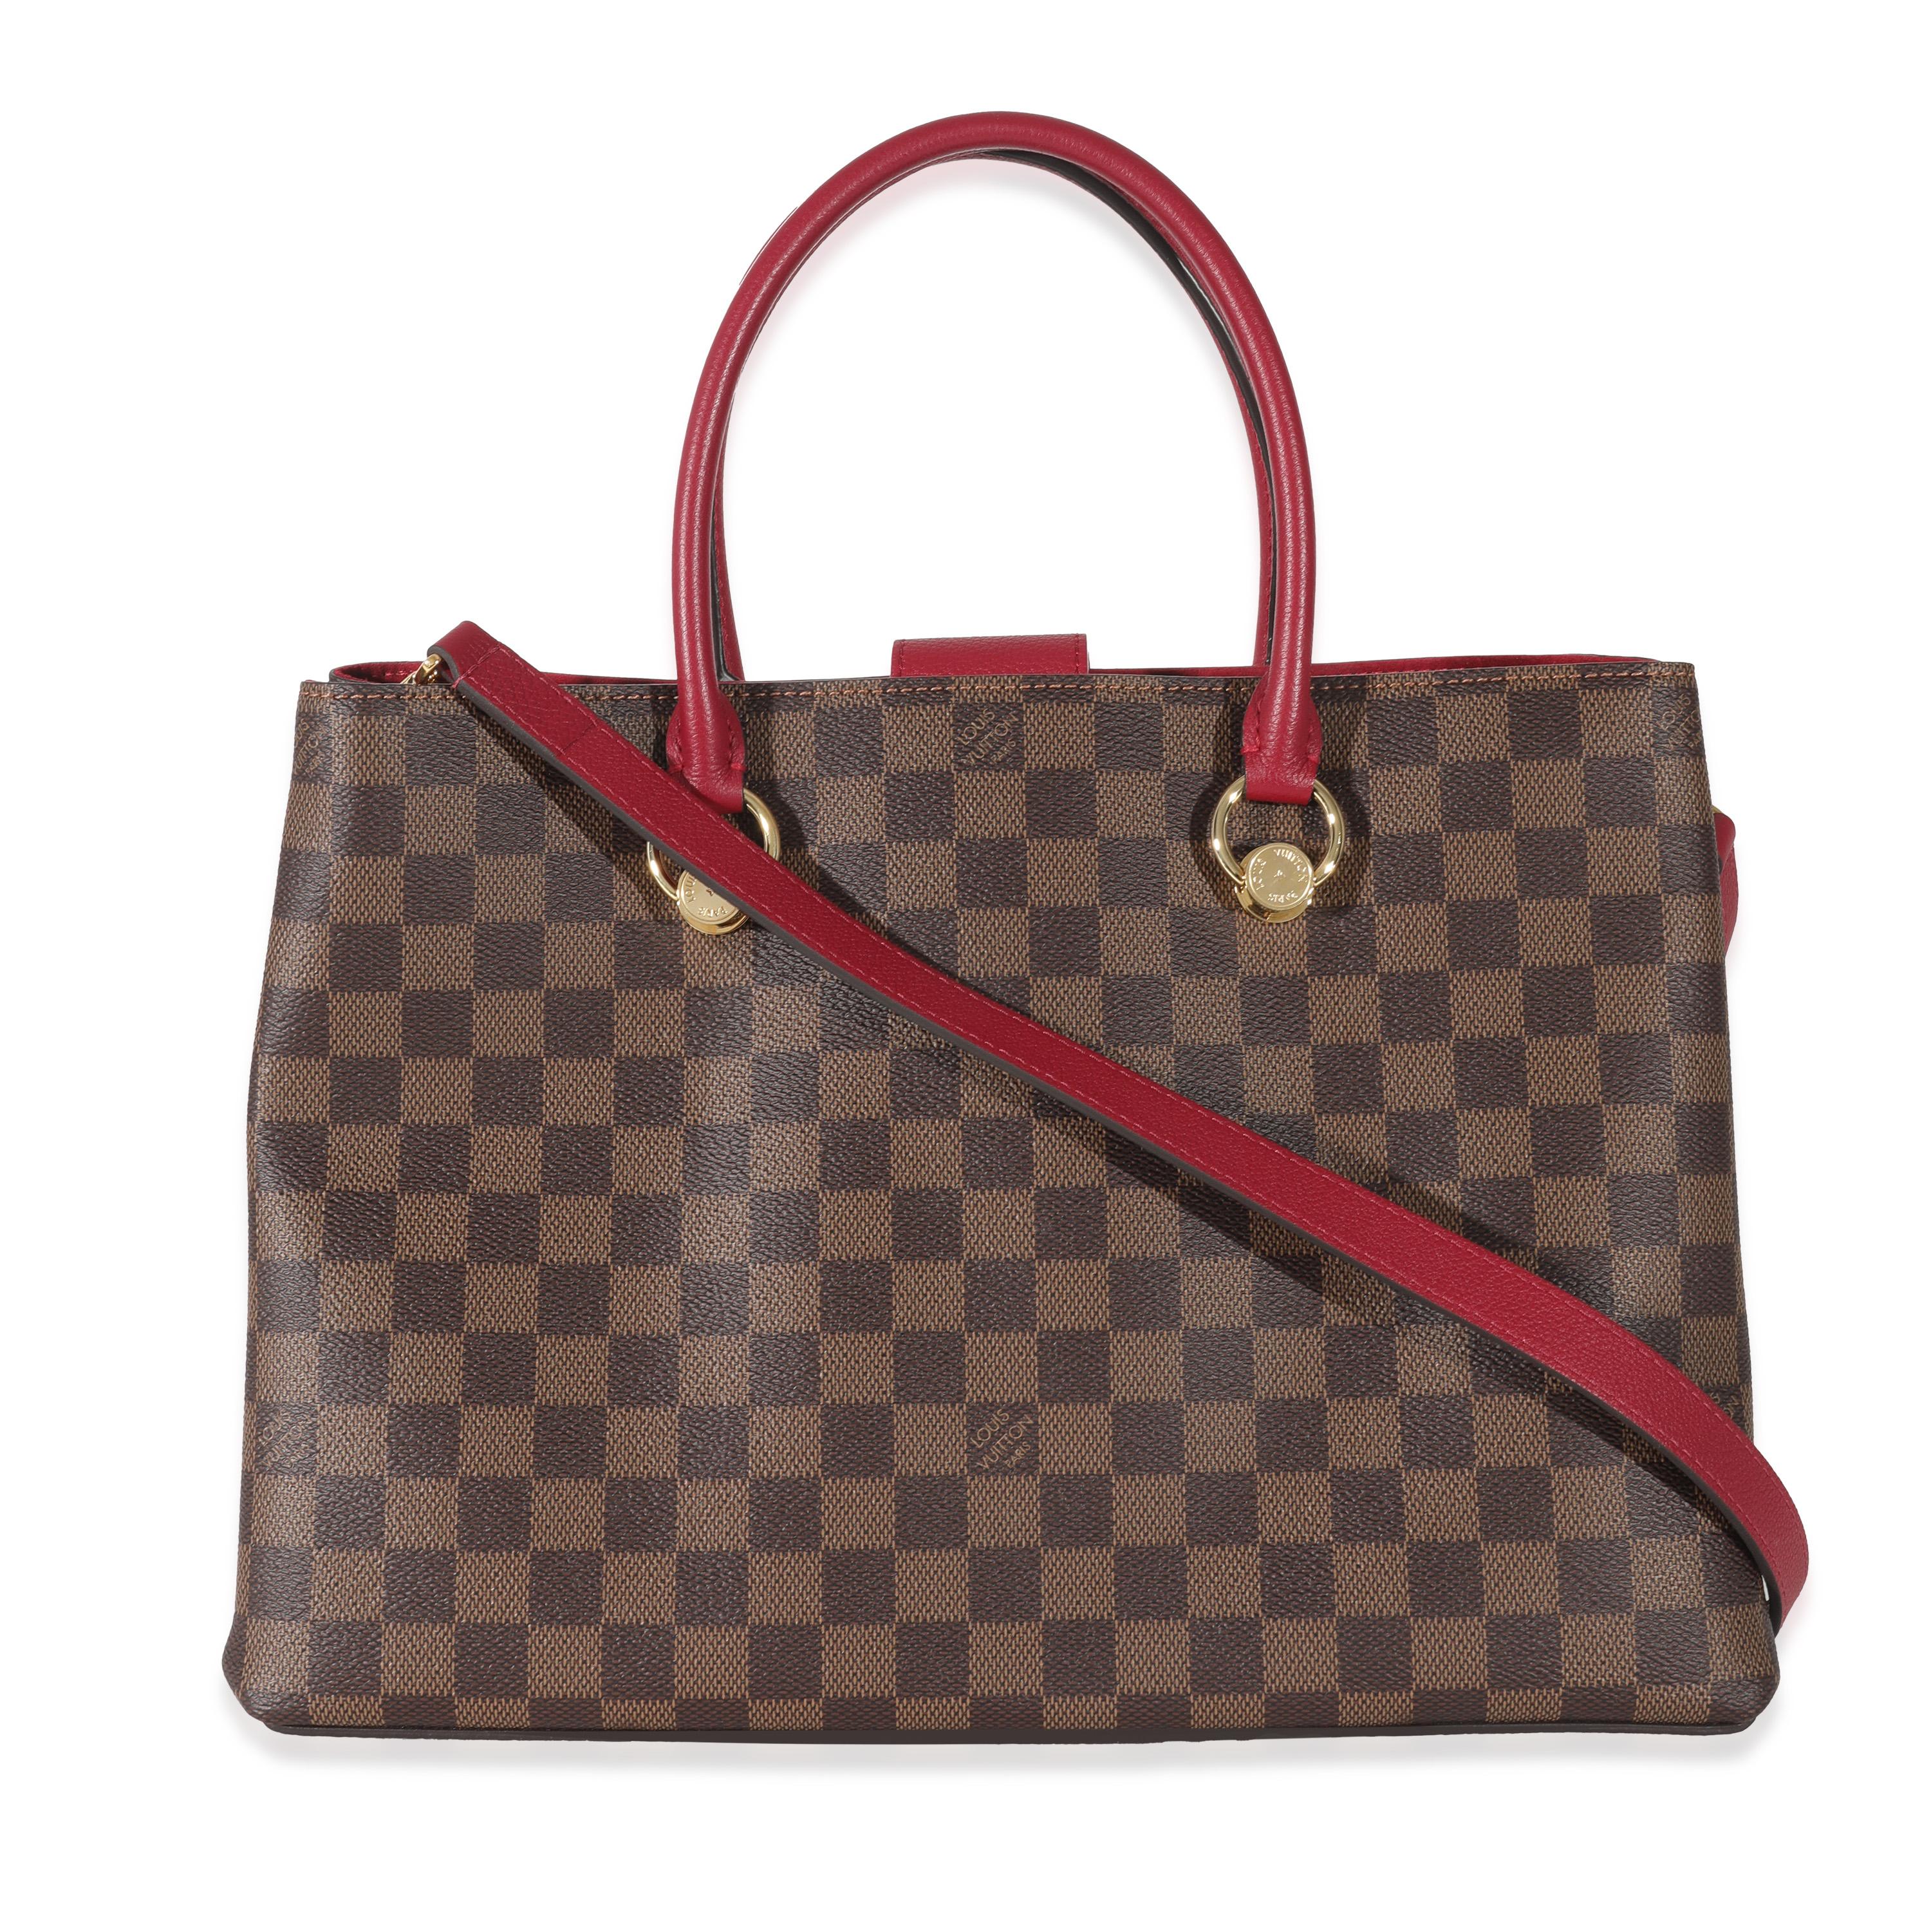 Louis Vuitton Damier Ebene Canvas LV Riverside Tote In Excellent Condition For Sale In New York, NY